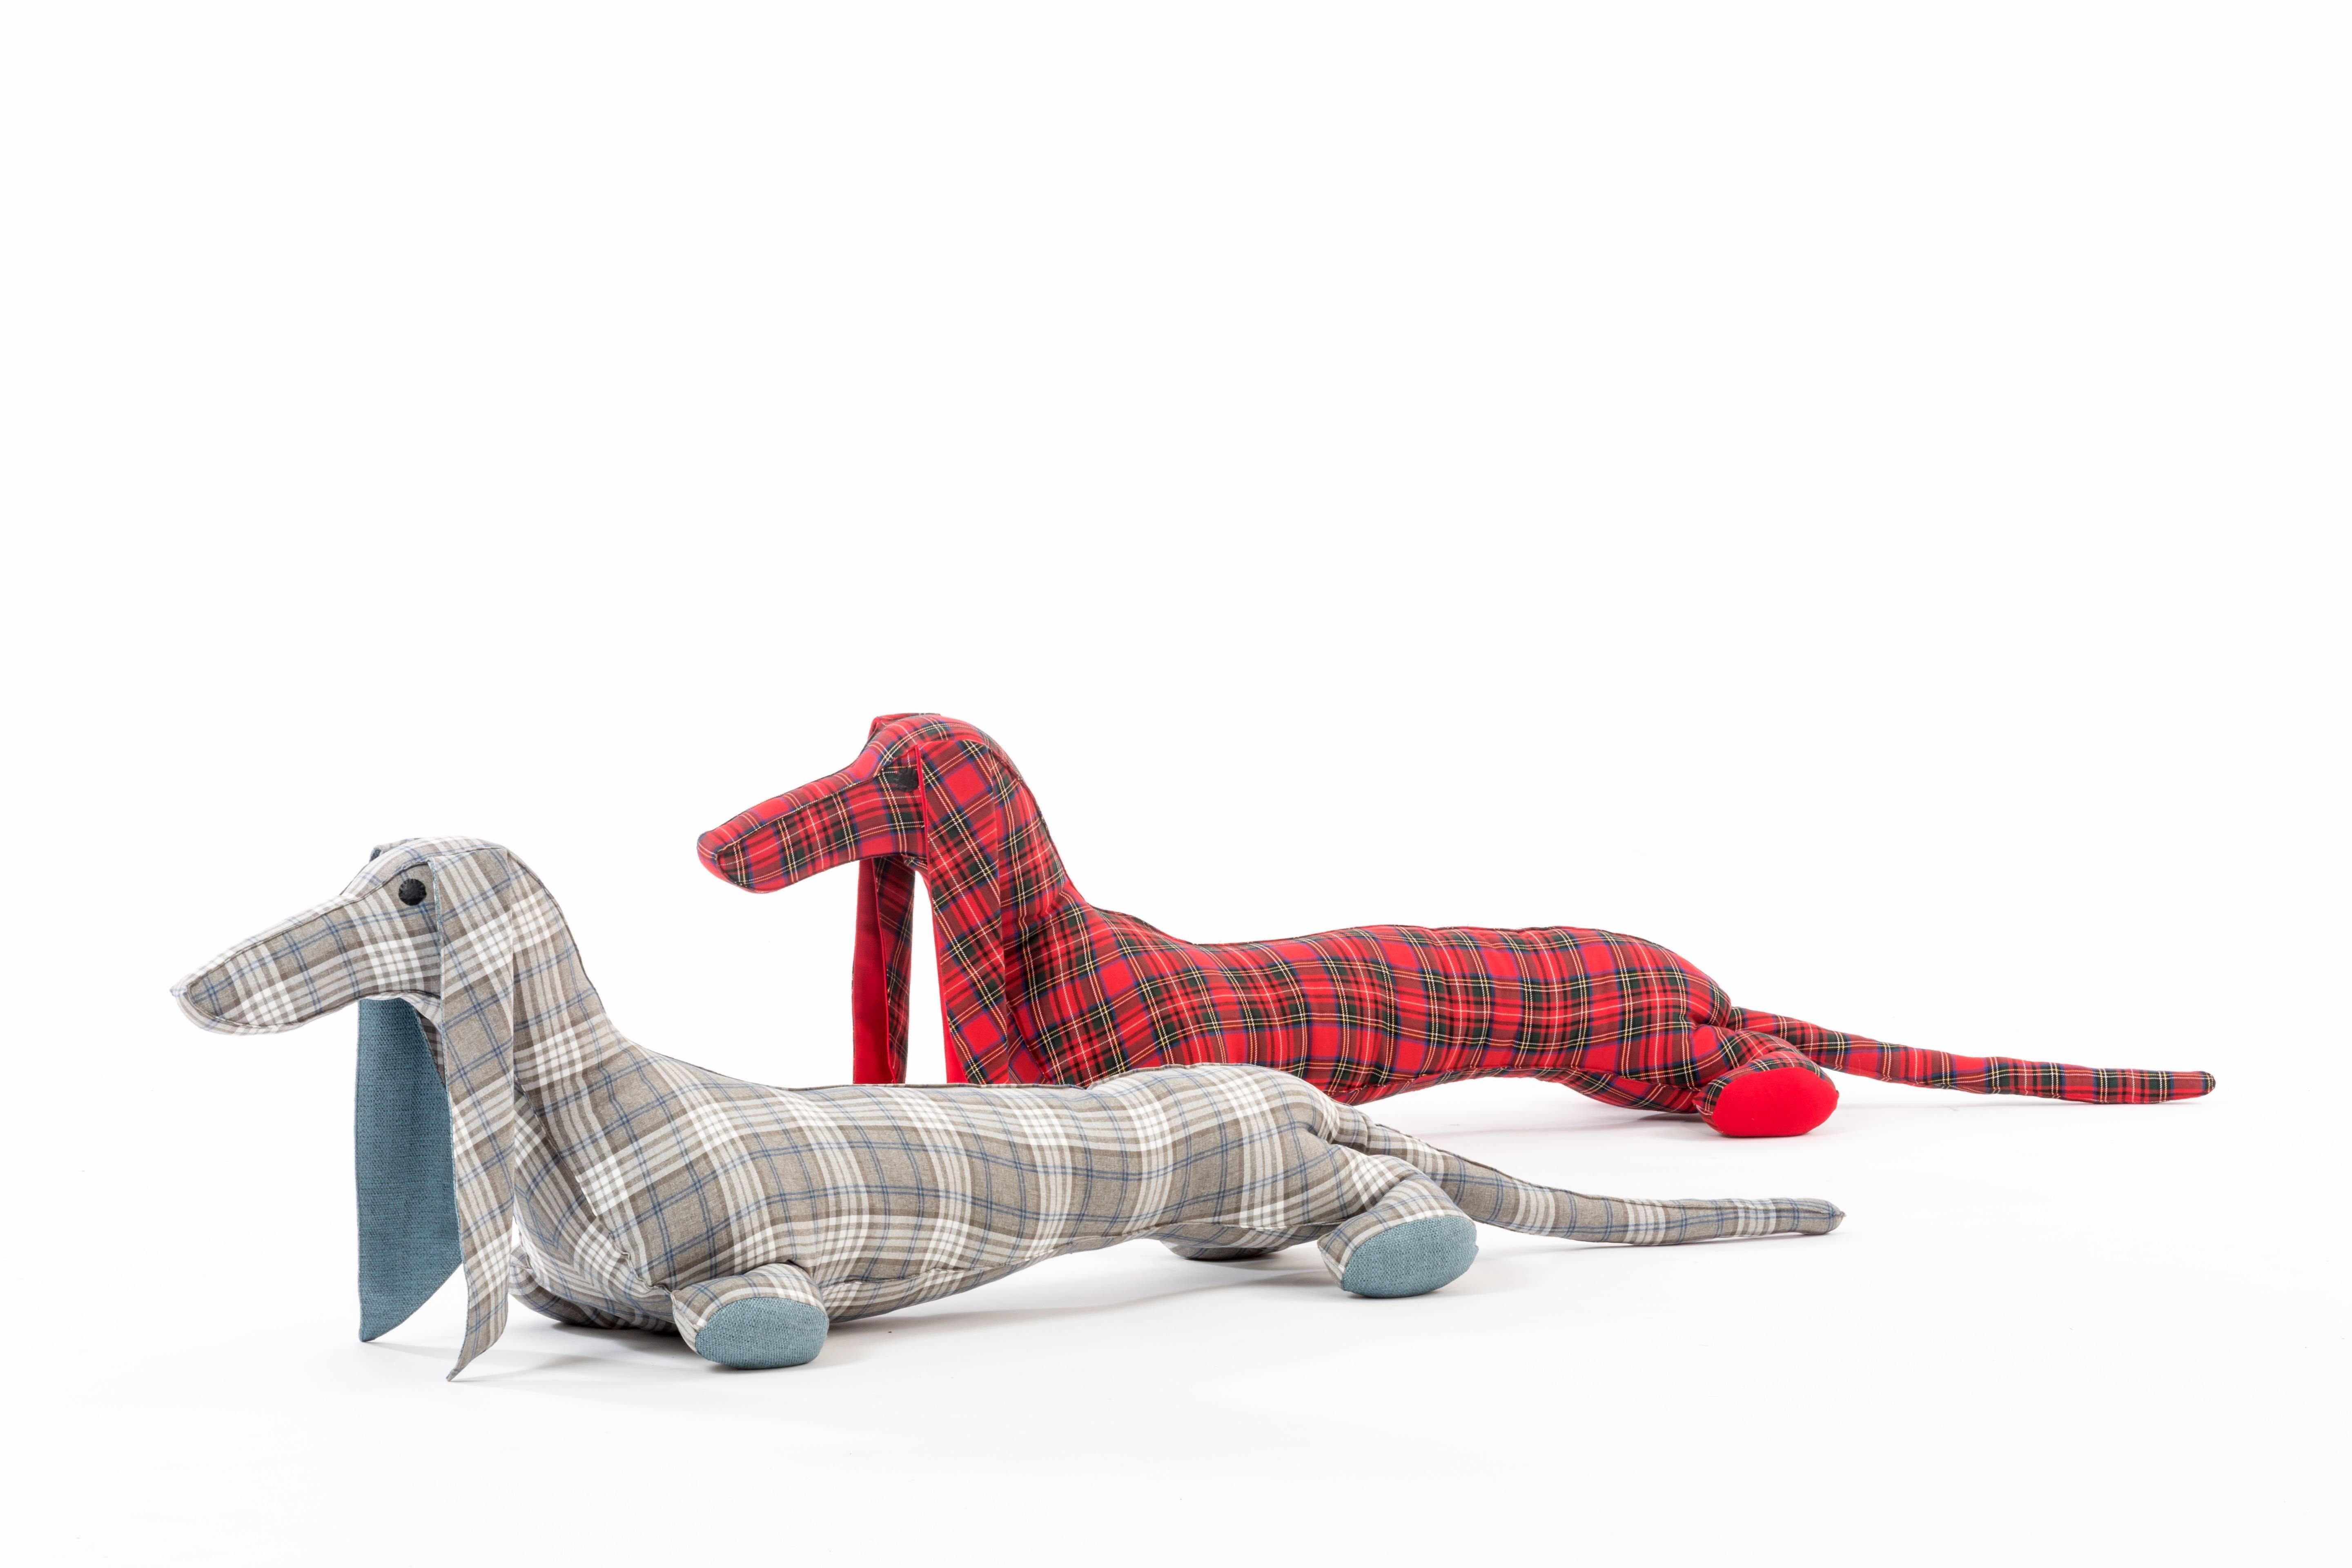 Israeli Small Dachshund Floor Pillow by Sarit Shani Hay in Cotton Blend